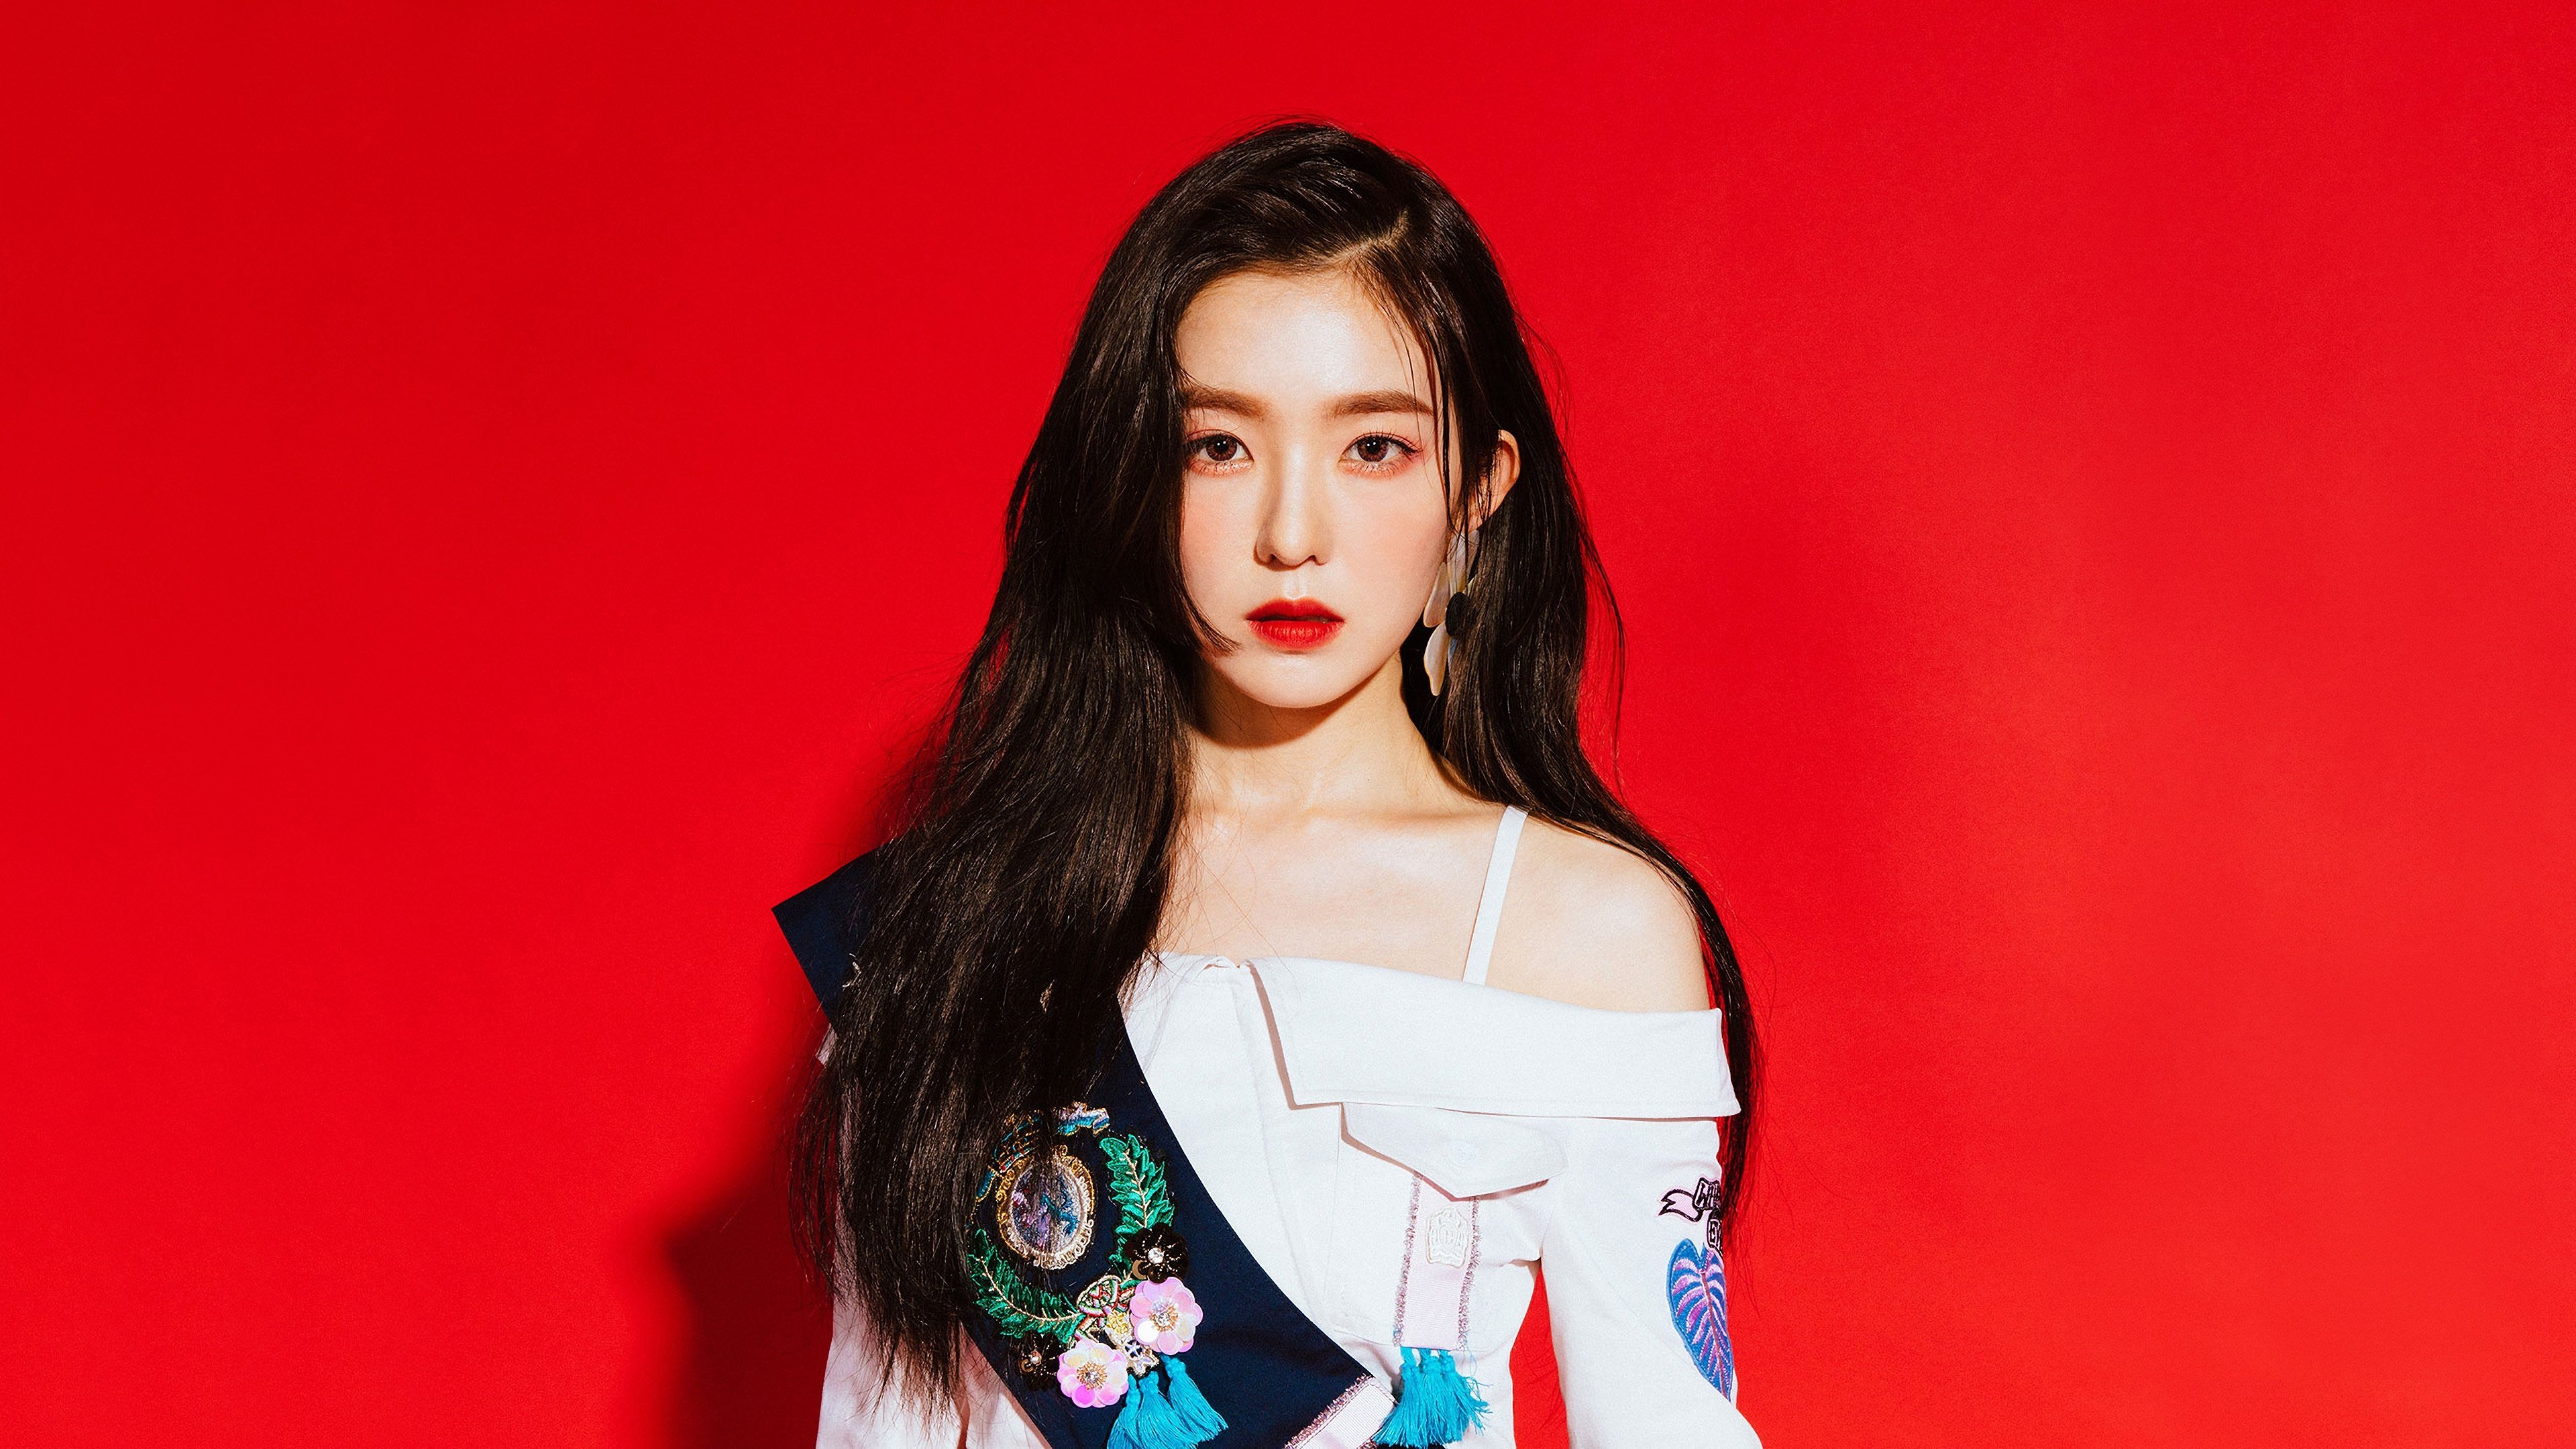 titel Tilbageholdenhed Påhængsmotor K-pop idols, such as Red Velvet's Irene, are bombing at the box office as  they seek big film careers | South China Morning Post